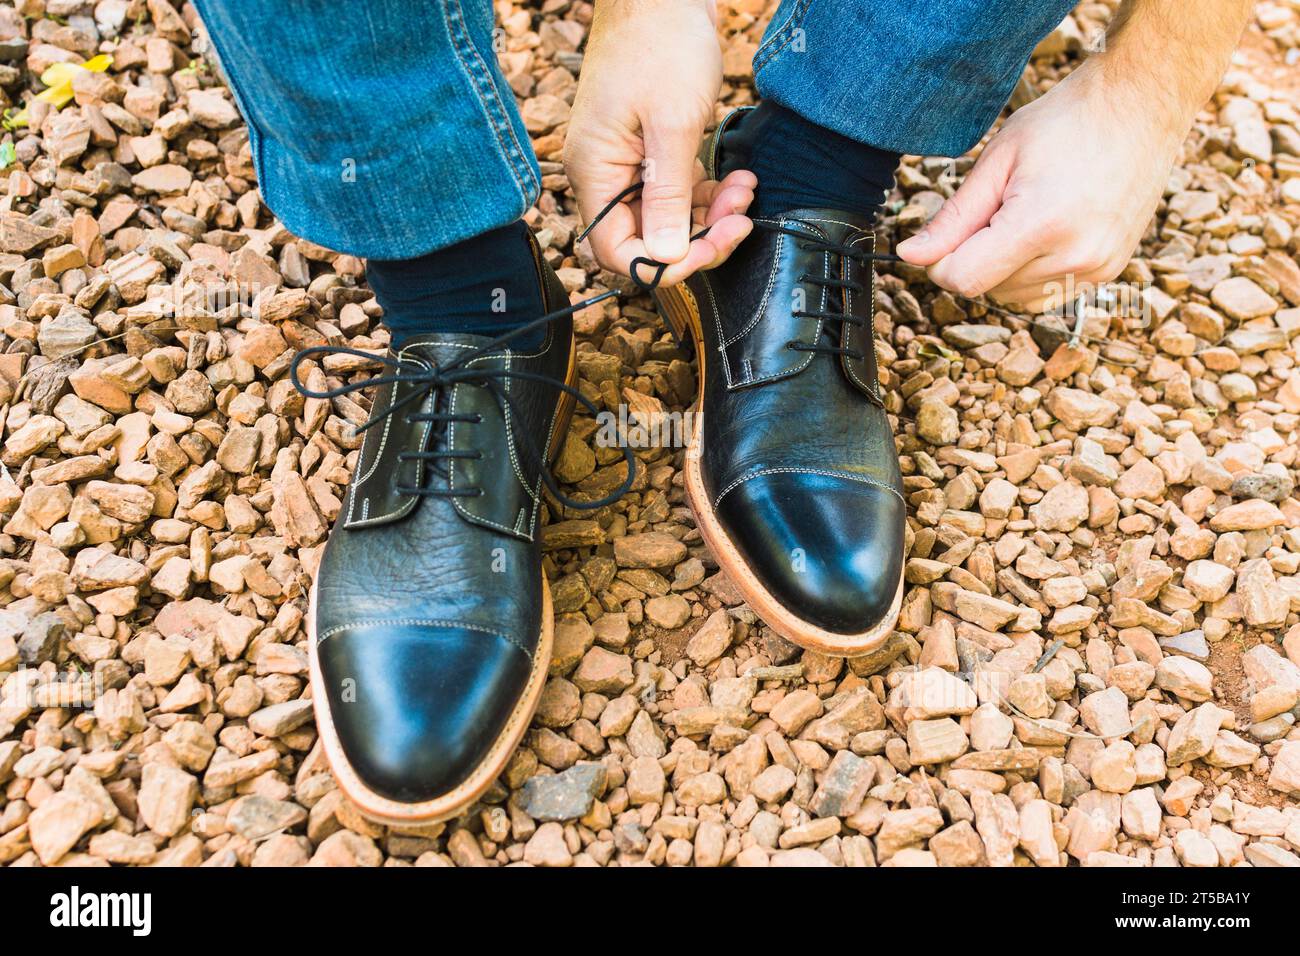 Elevated view man s foot pebble tying shoelace Stock Photo